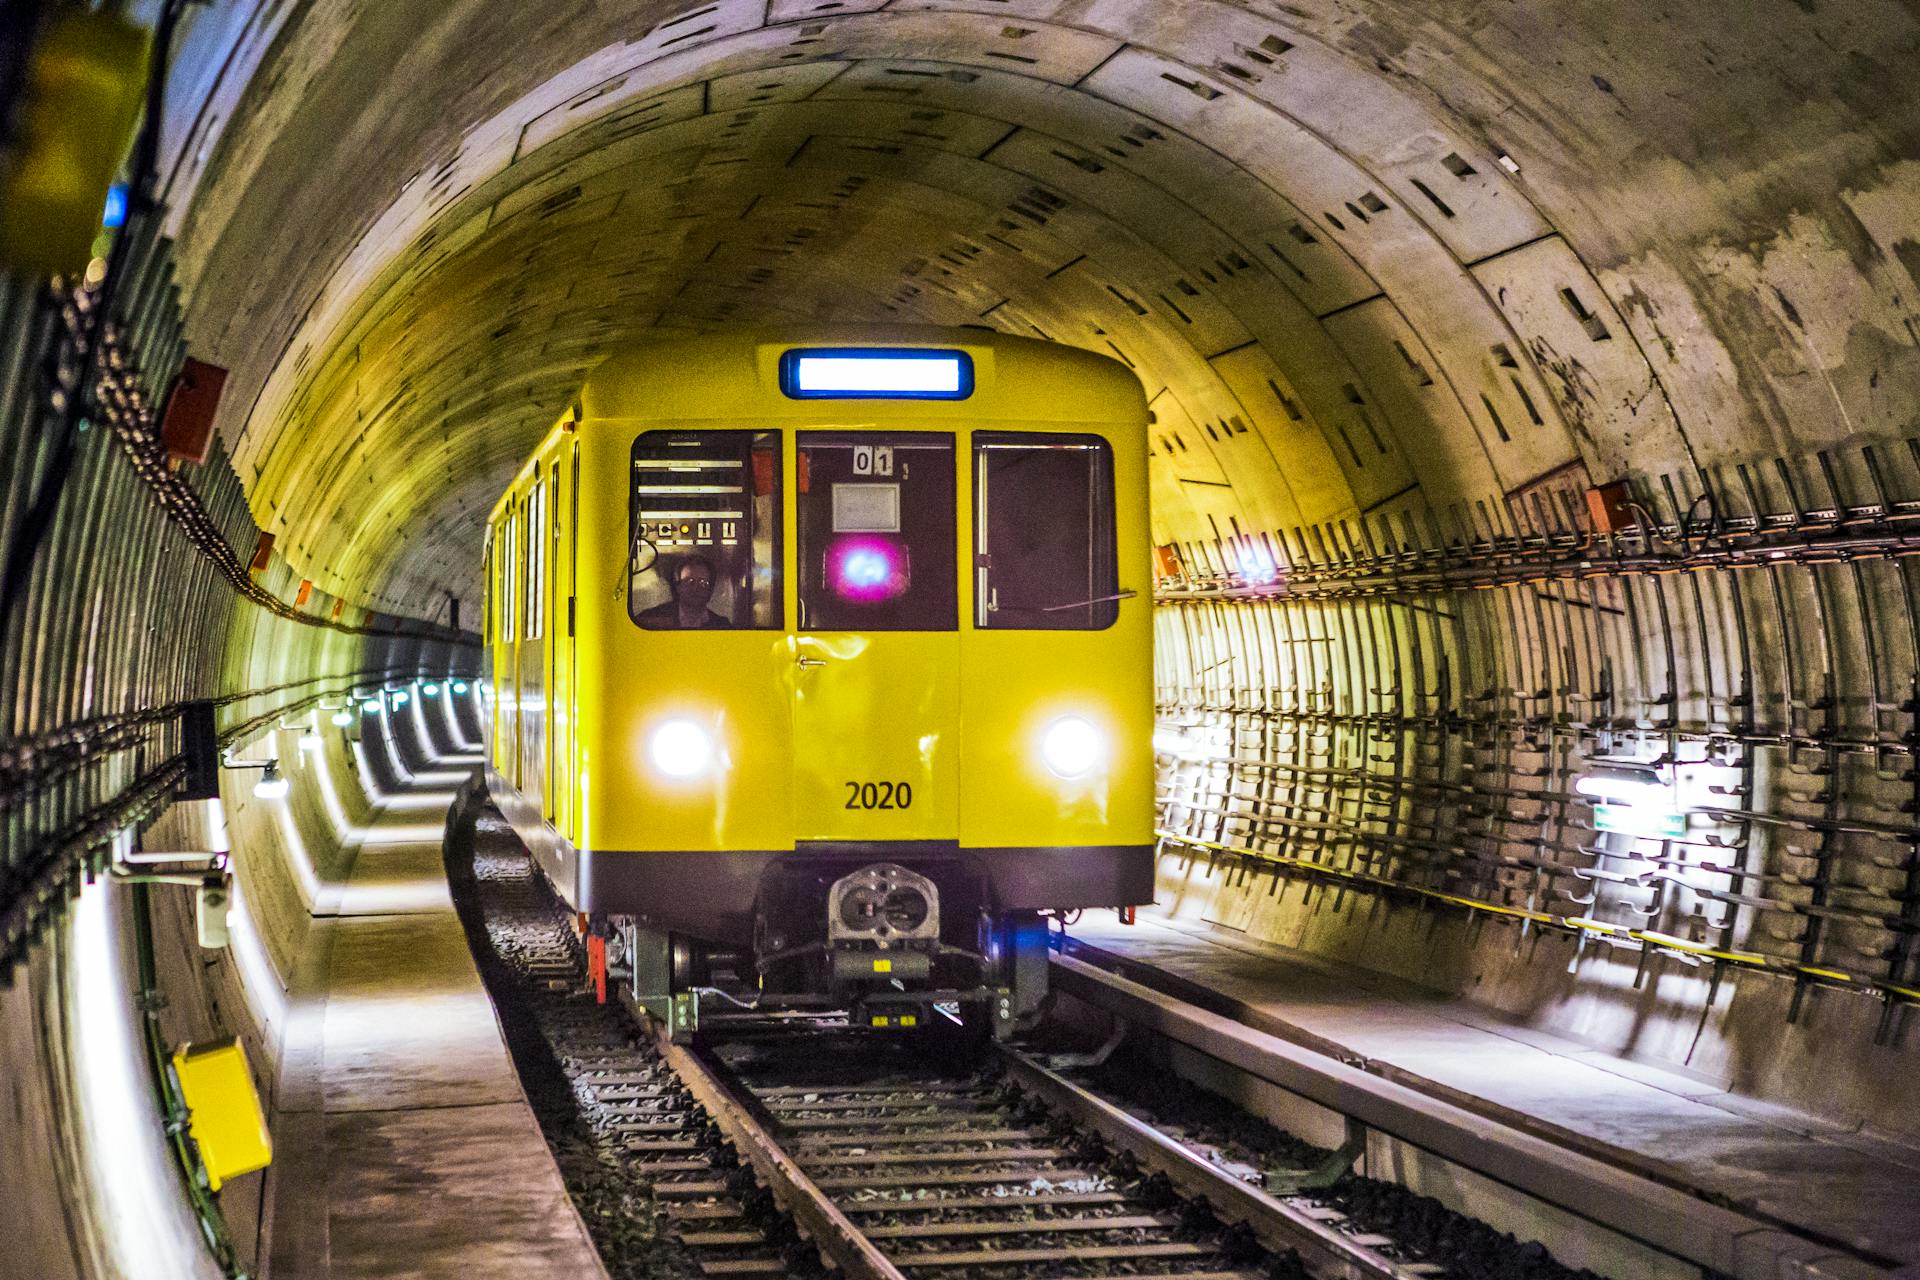 A yellow and black train passing through a tunnel | Source: Pexels